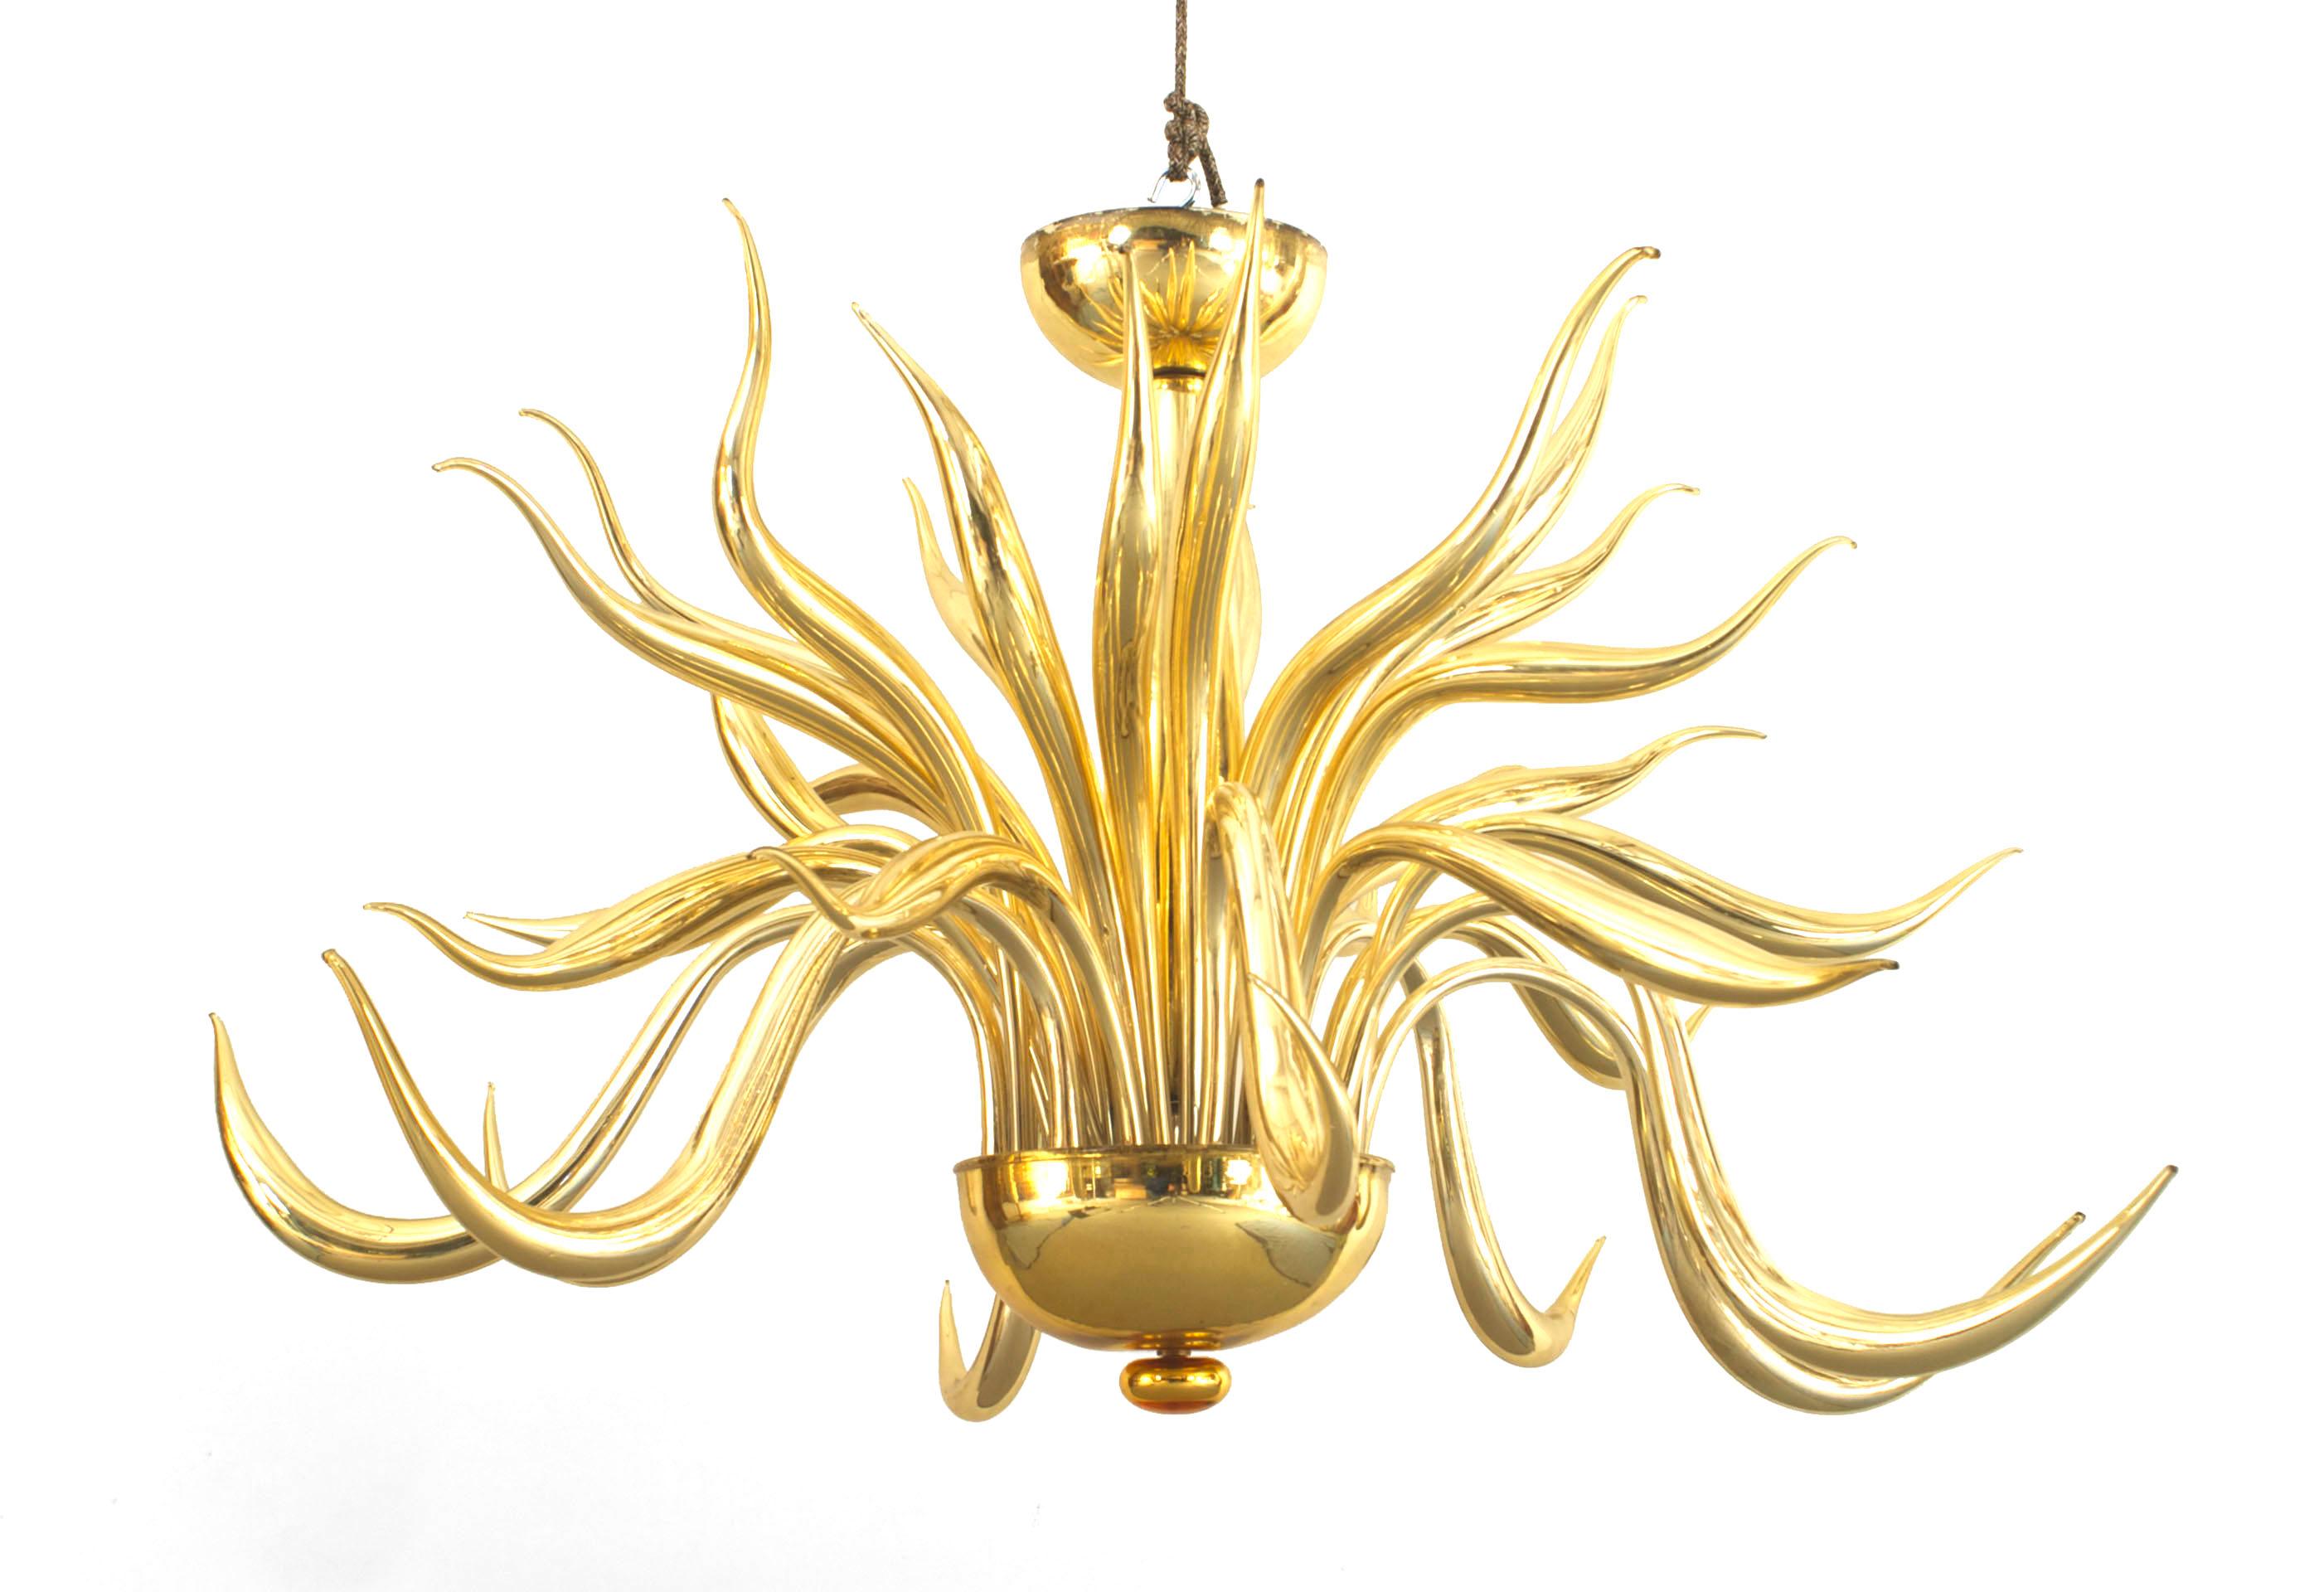 Post-War Italian Venetian Murano gilt glass chandelier with multiple scroll arms emanating from a center shaft with a bowl bottom.
